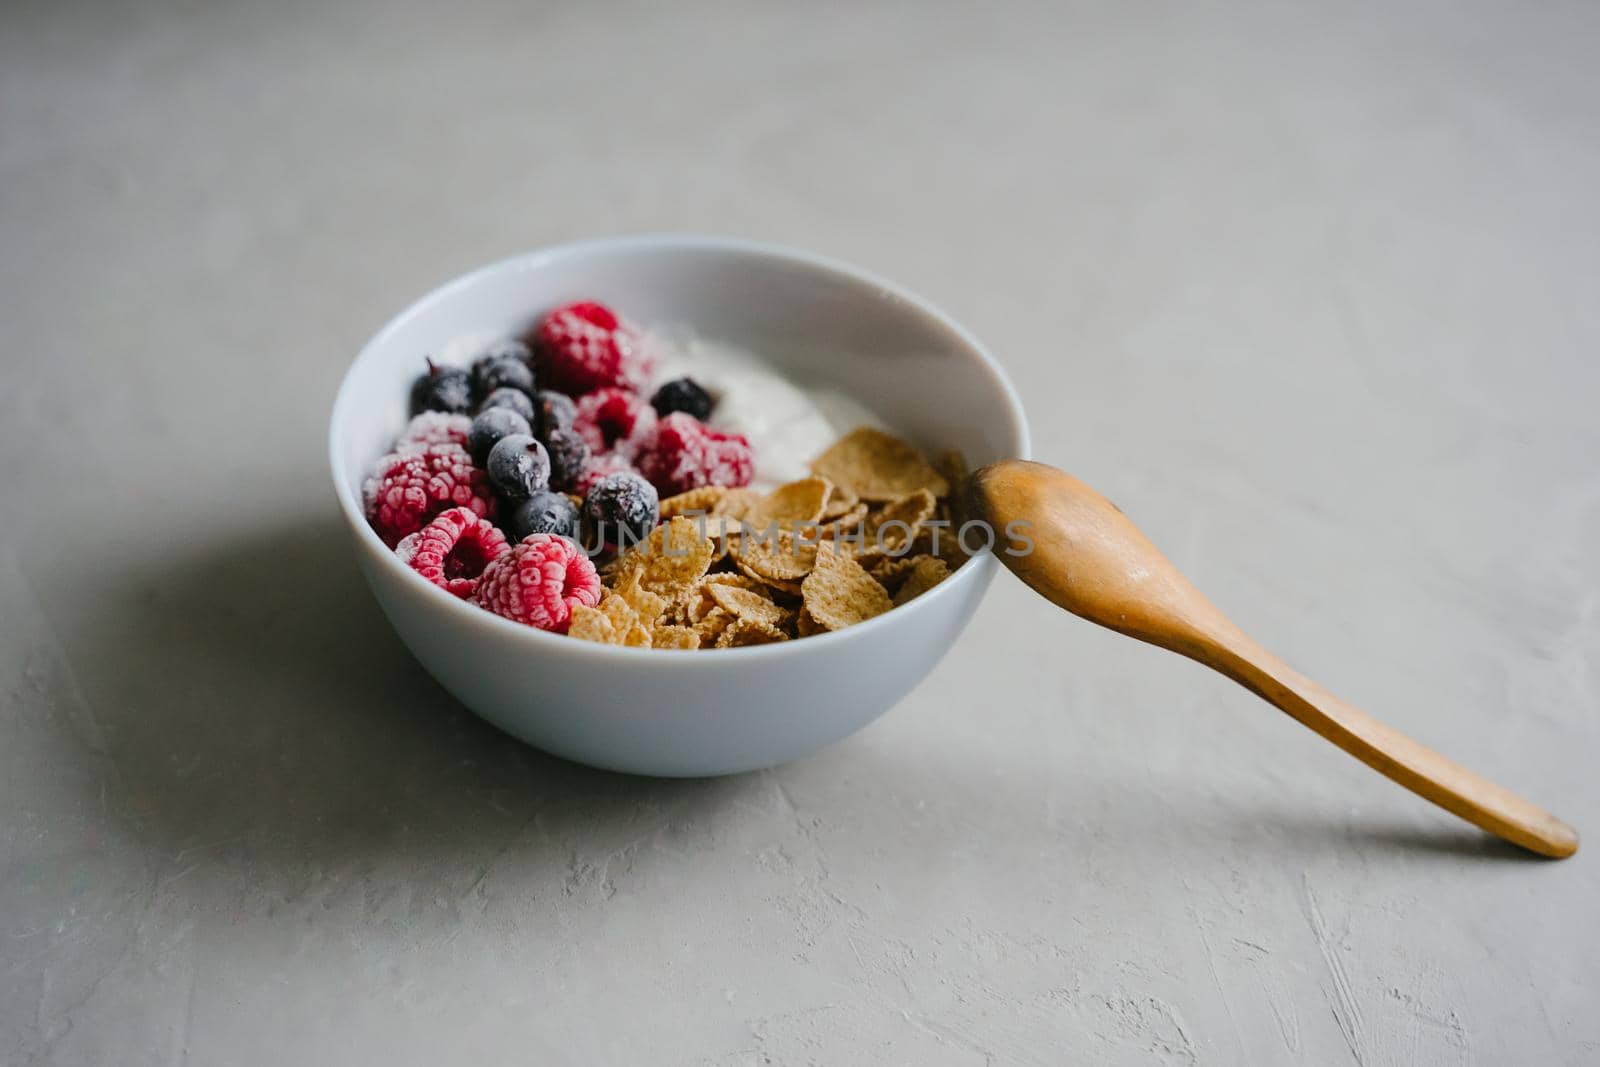 Healthy breakfast with berries, cereals and natural yogurt. Multi-lacquered cereals for breakfast. Berries in ice. Frozen raspberries and black currants. Wooden spoon. Delicious and healthy breakfast.